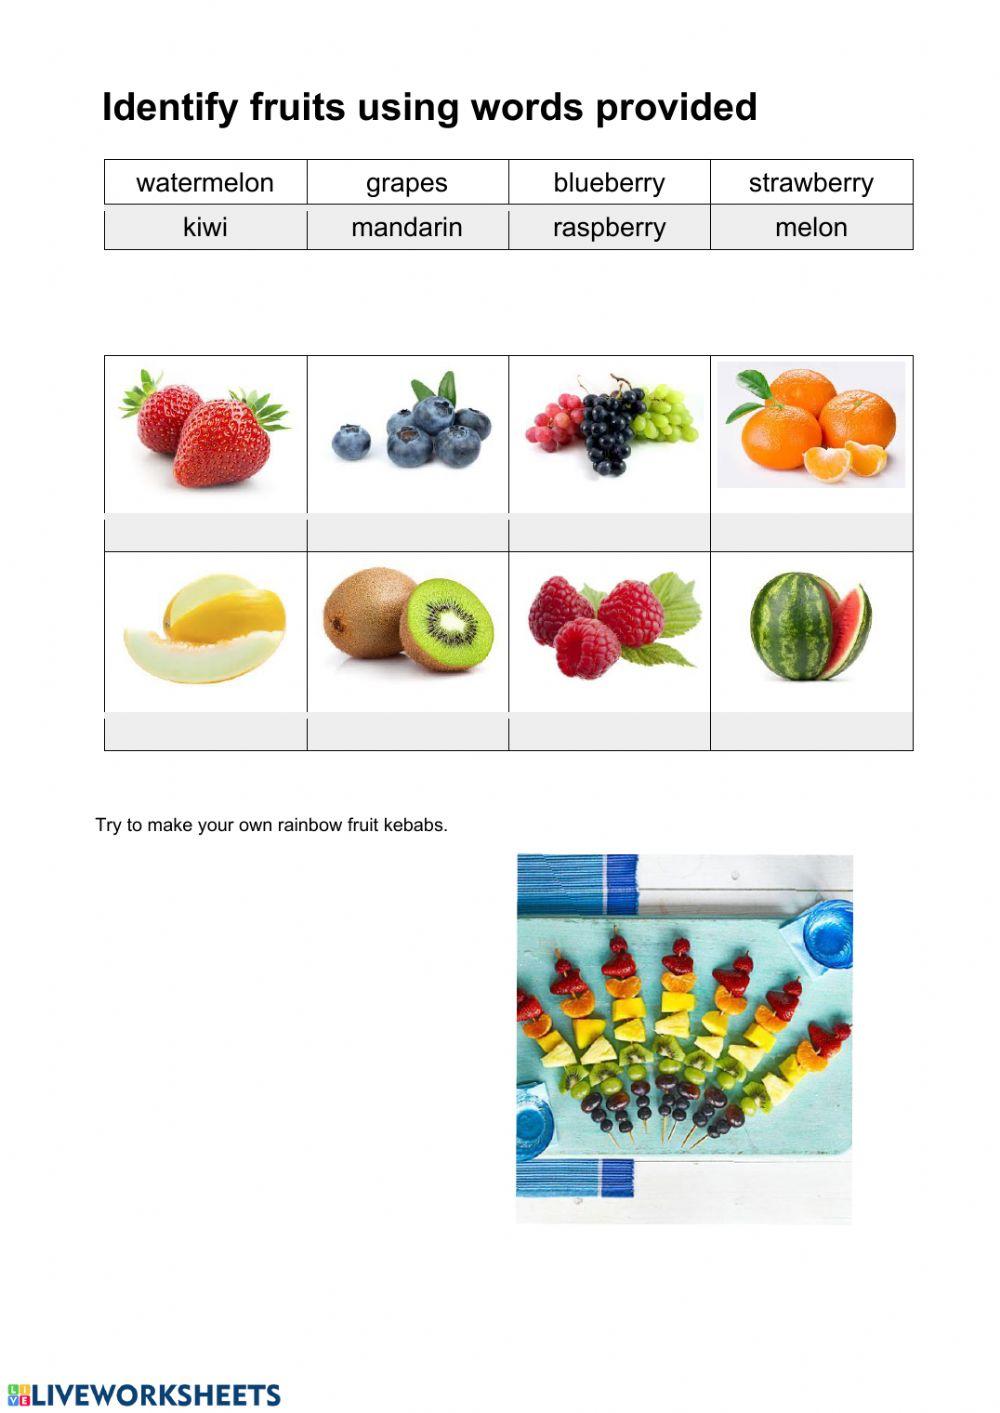 Match the fruits